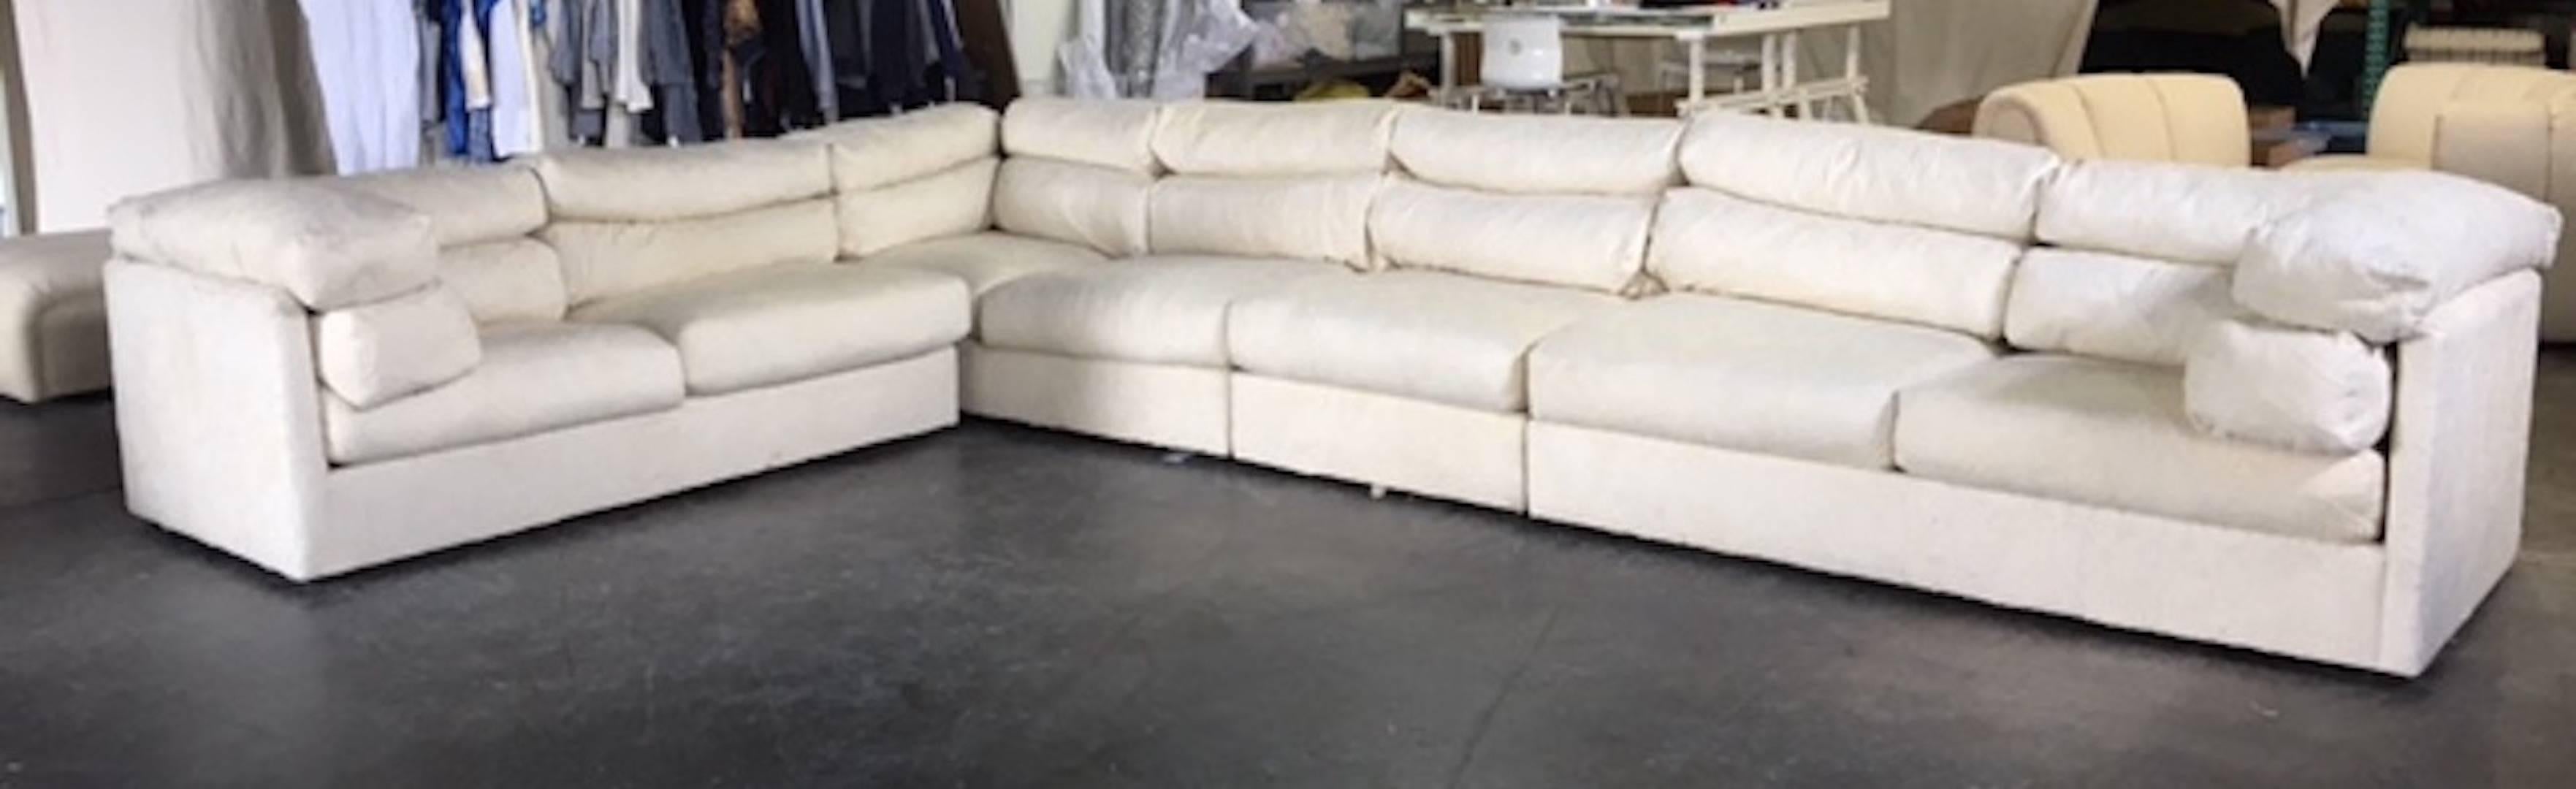 Mid-Century Modern Monumental Sectional Sofa by Directional